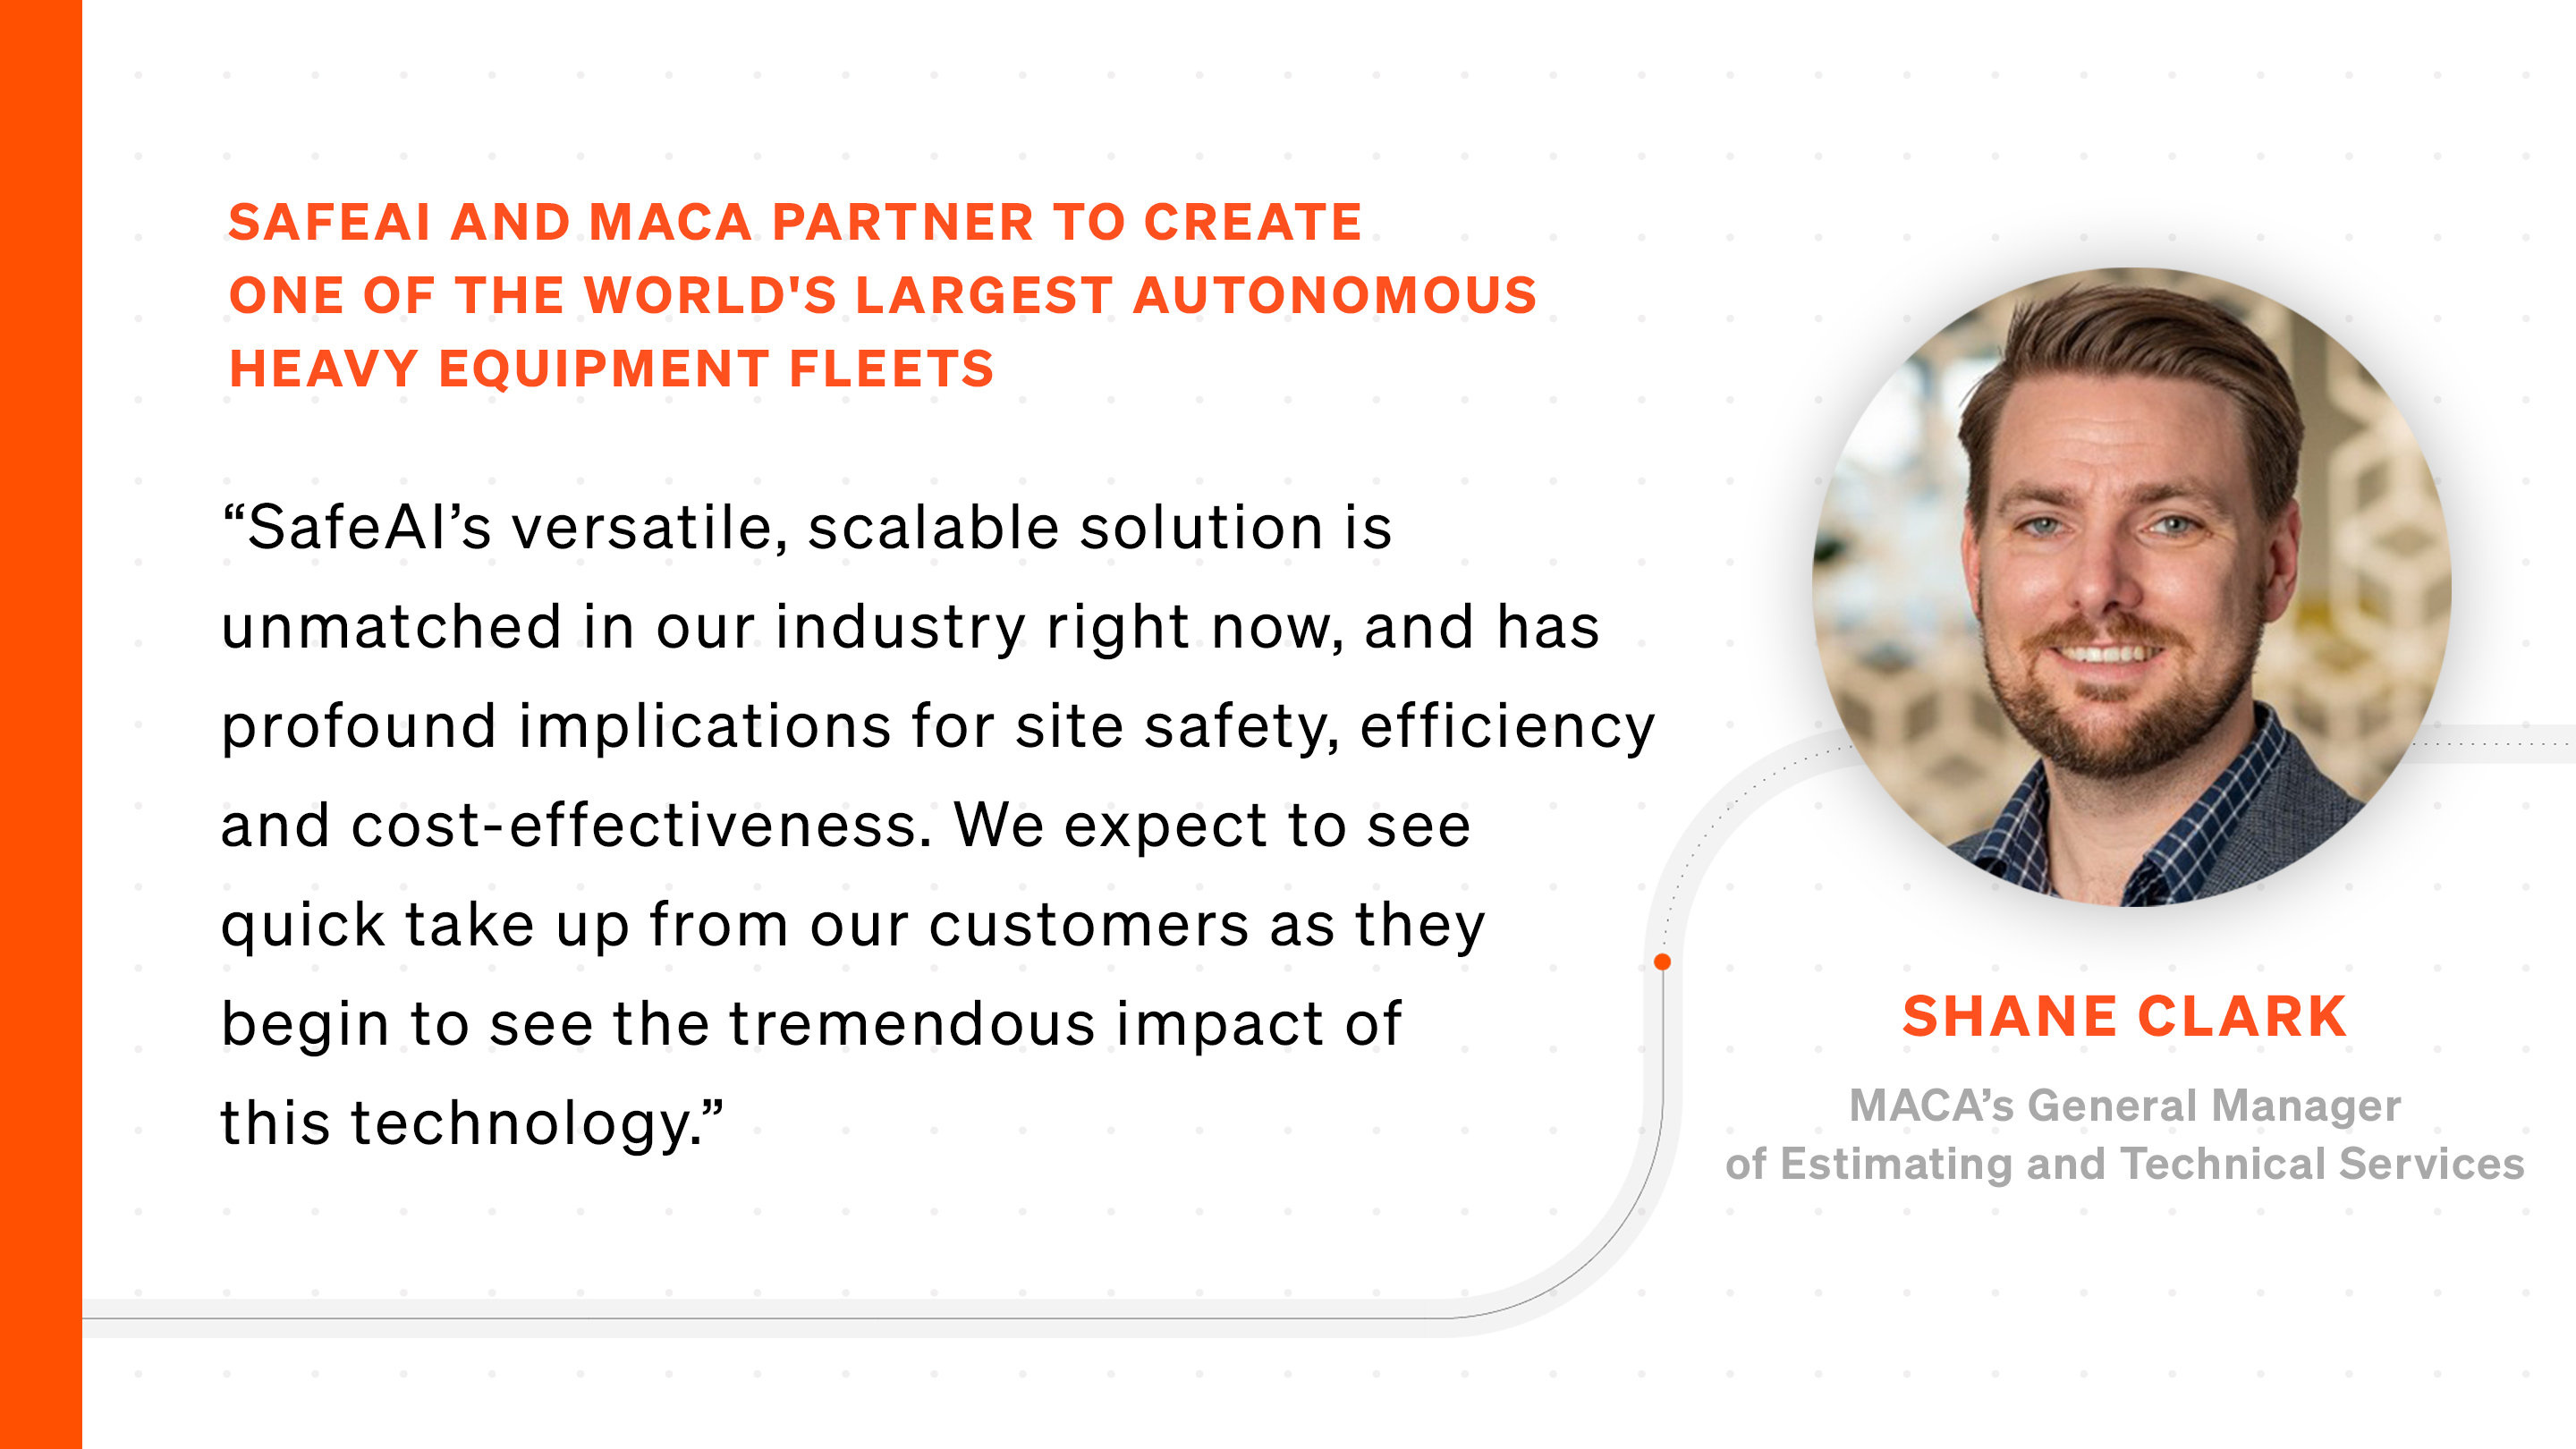 SafeAI and MACA Partner to Create One Of The World's Largest Autonomous Heavy Equipment Fleets